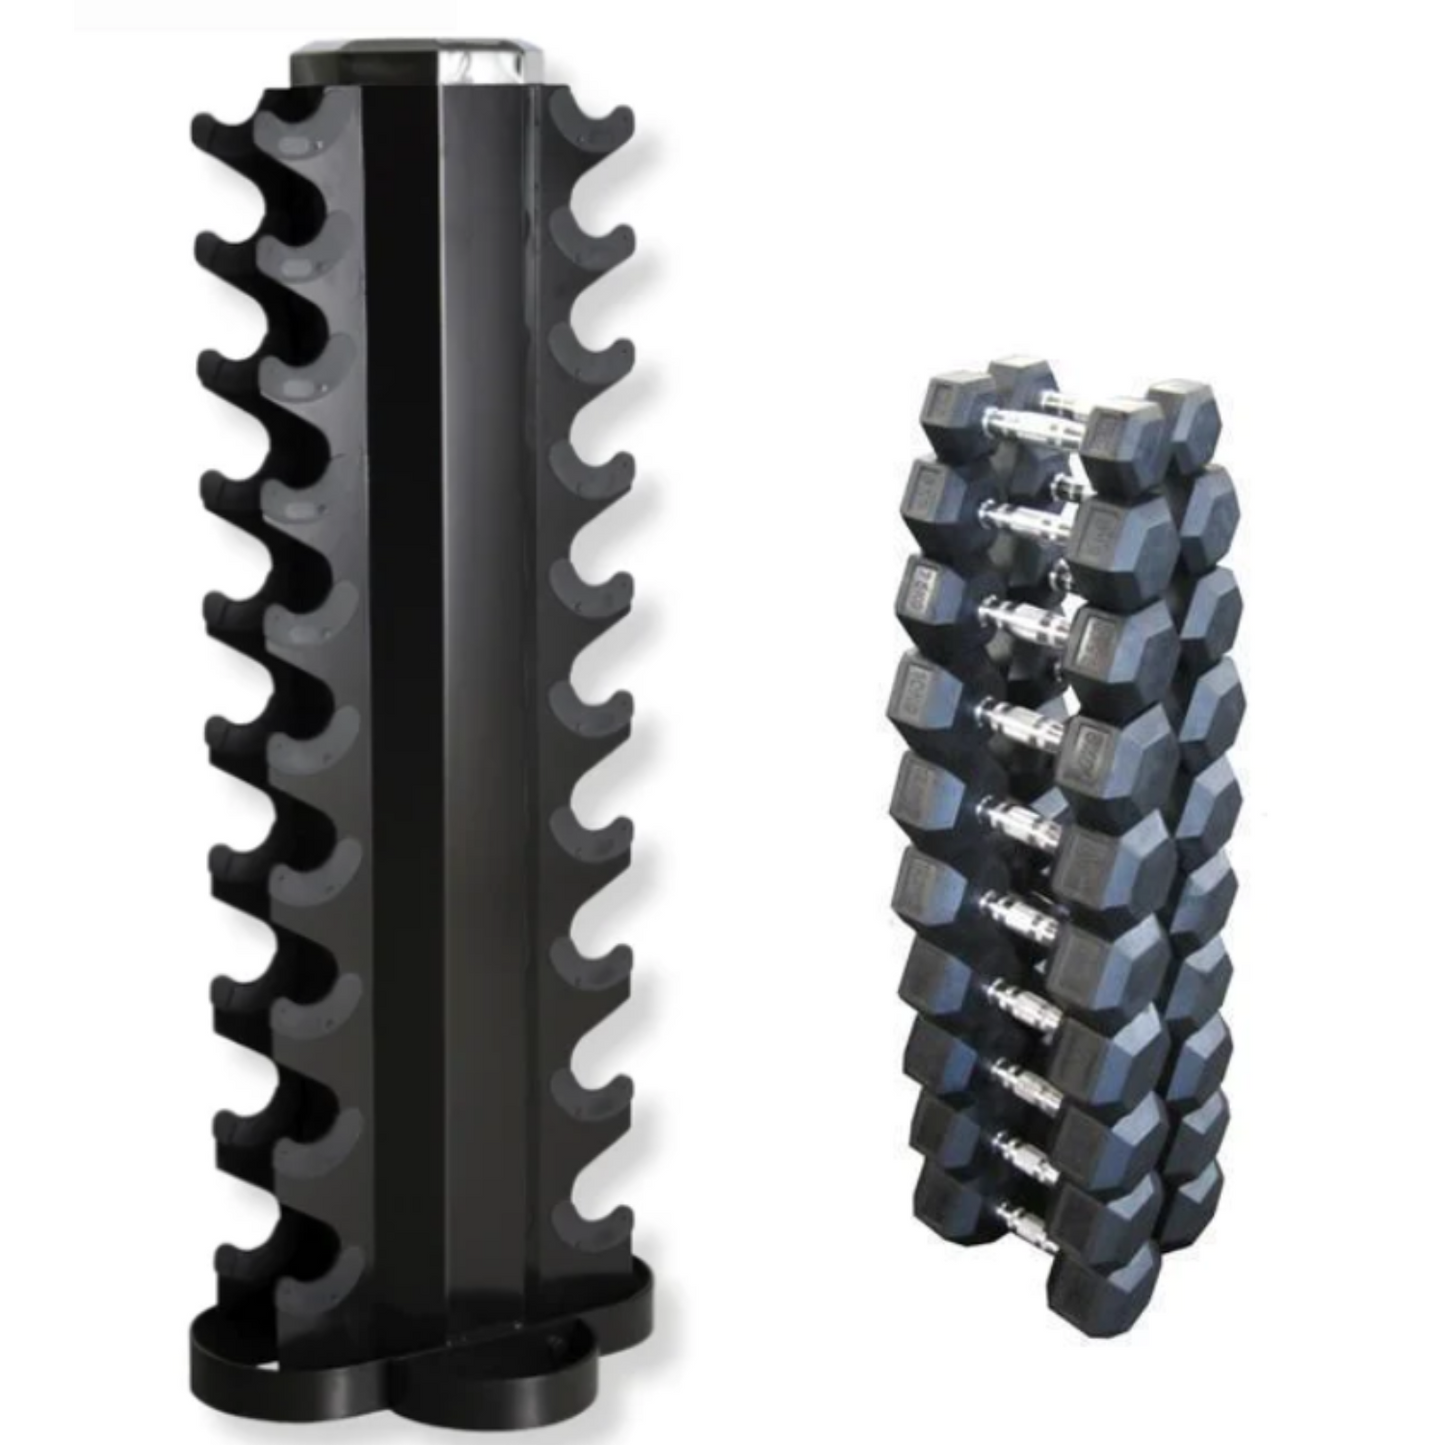 Muscle Motion 10 Pairs Rubber Hex (1kg to 10kg) Dumbbell with Tower Rack-Gym Direct